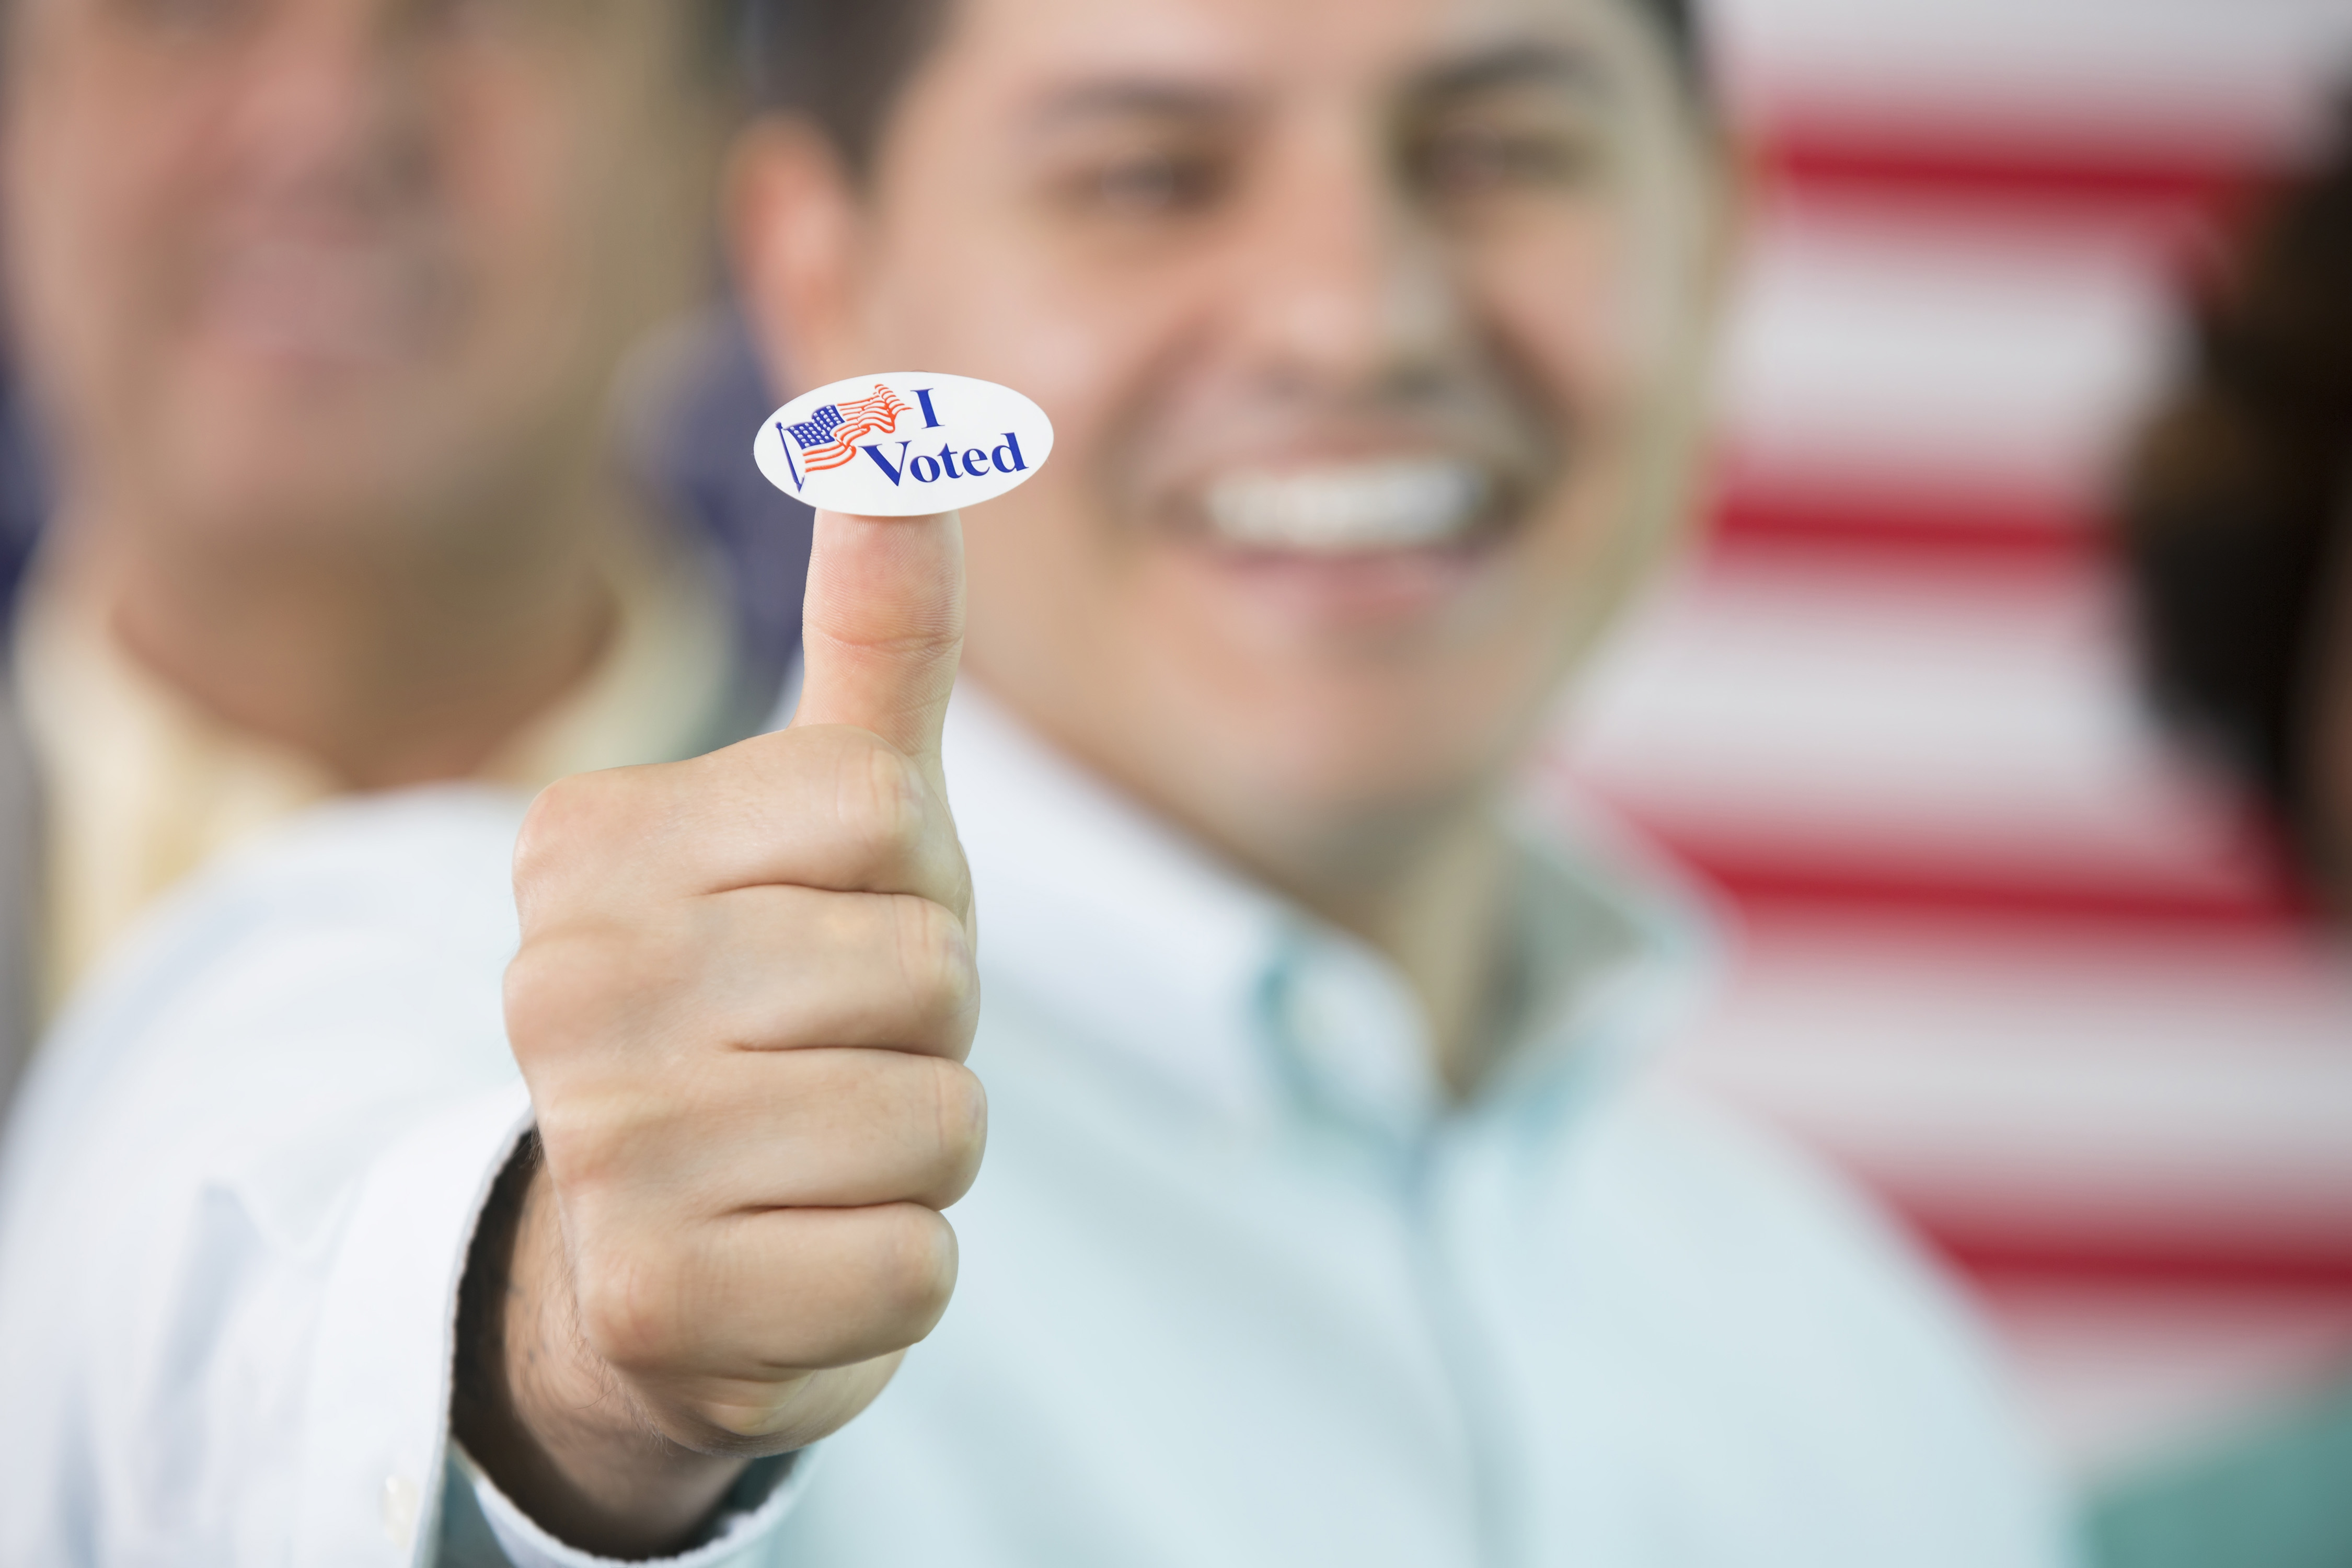 'If you took a survey of Latinos and asked what is their most concerning issue, education and the economy would be in the top five,' says political scientist Beth Ginsberg. (Getty Images)